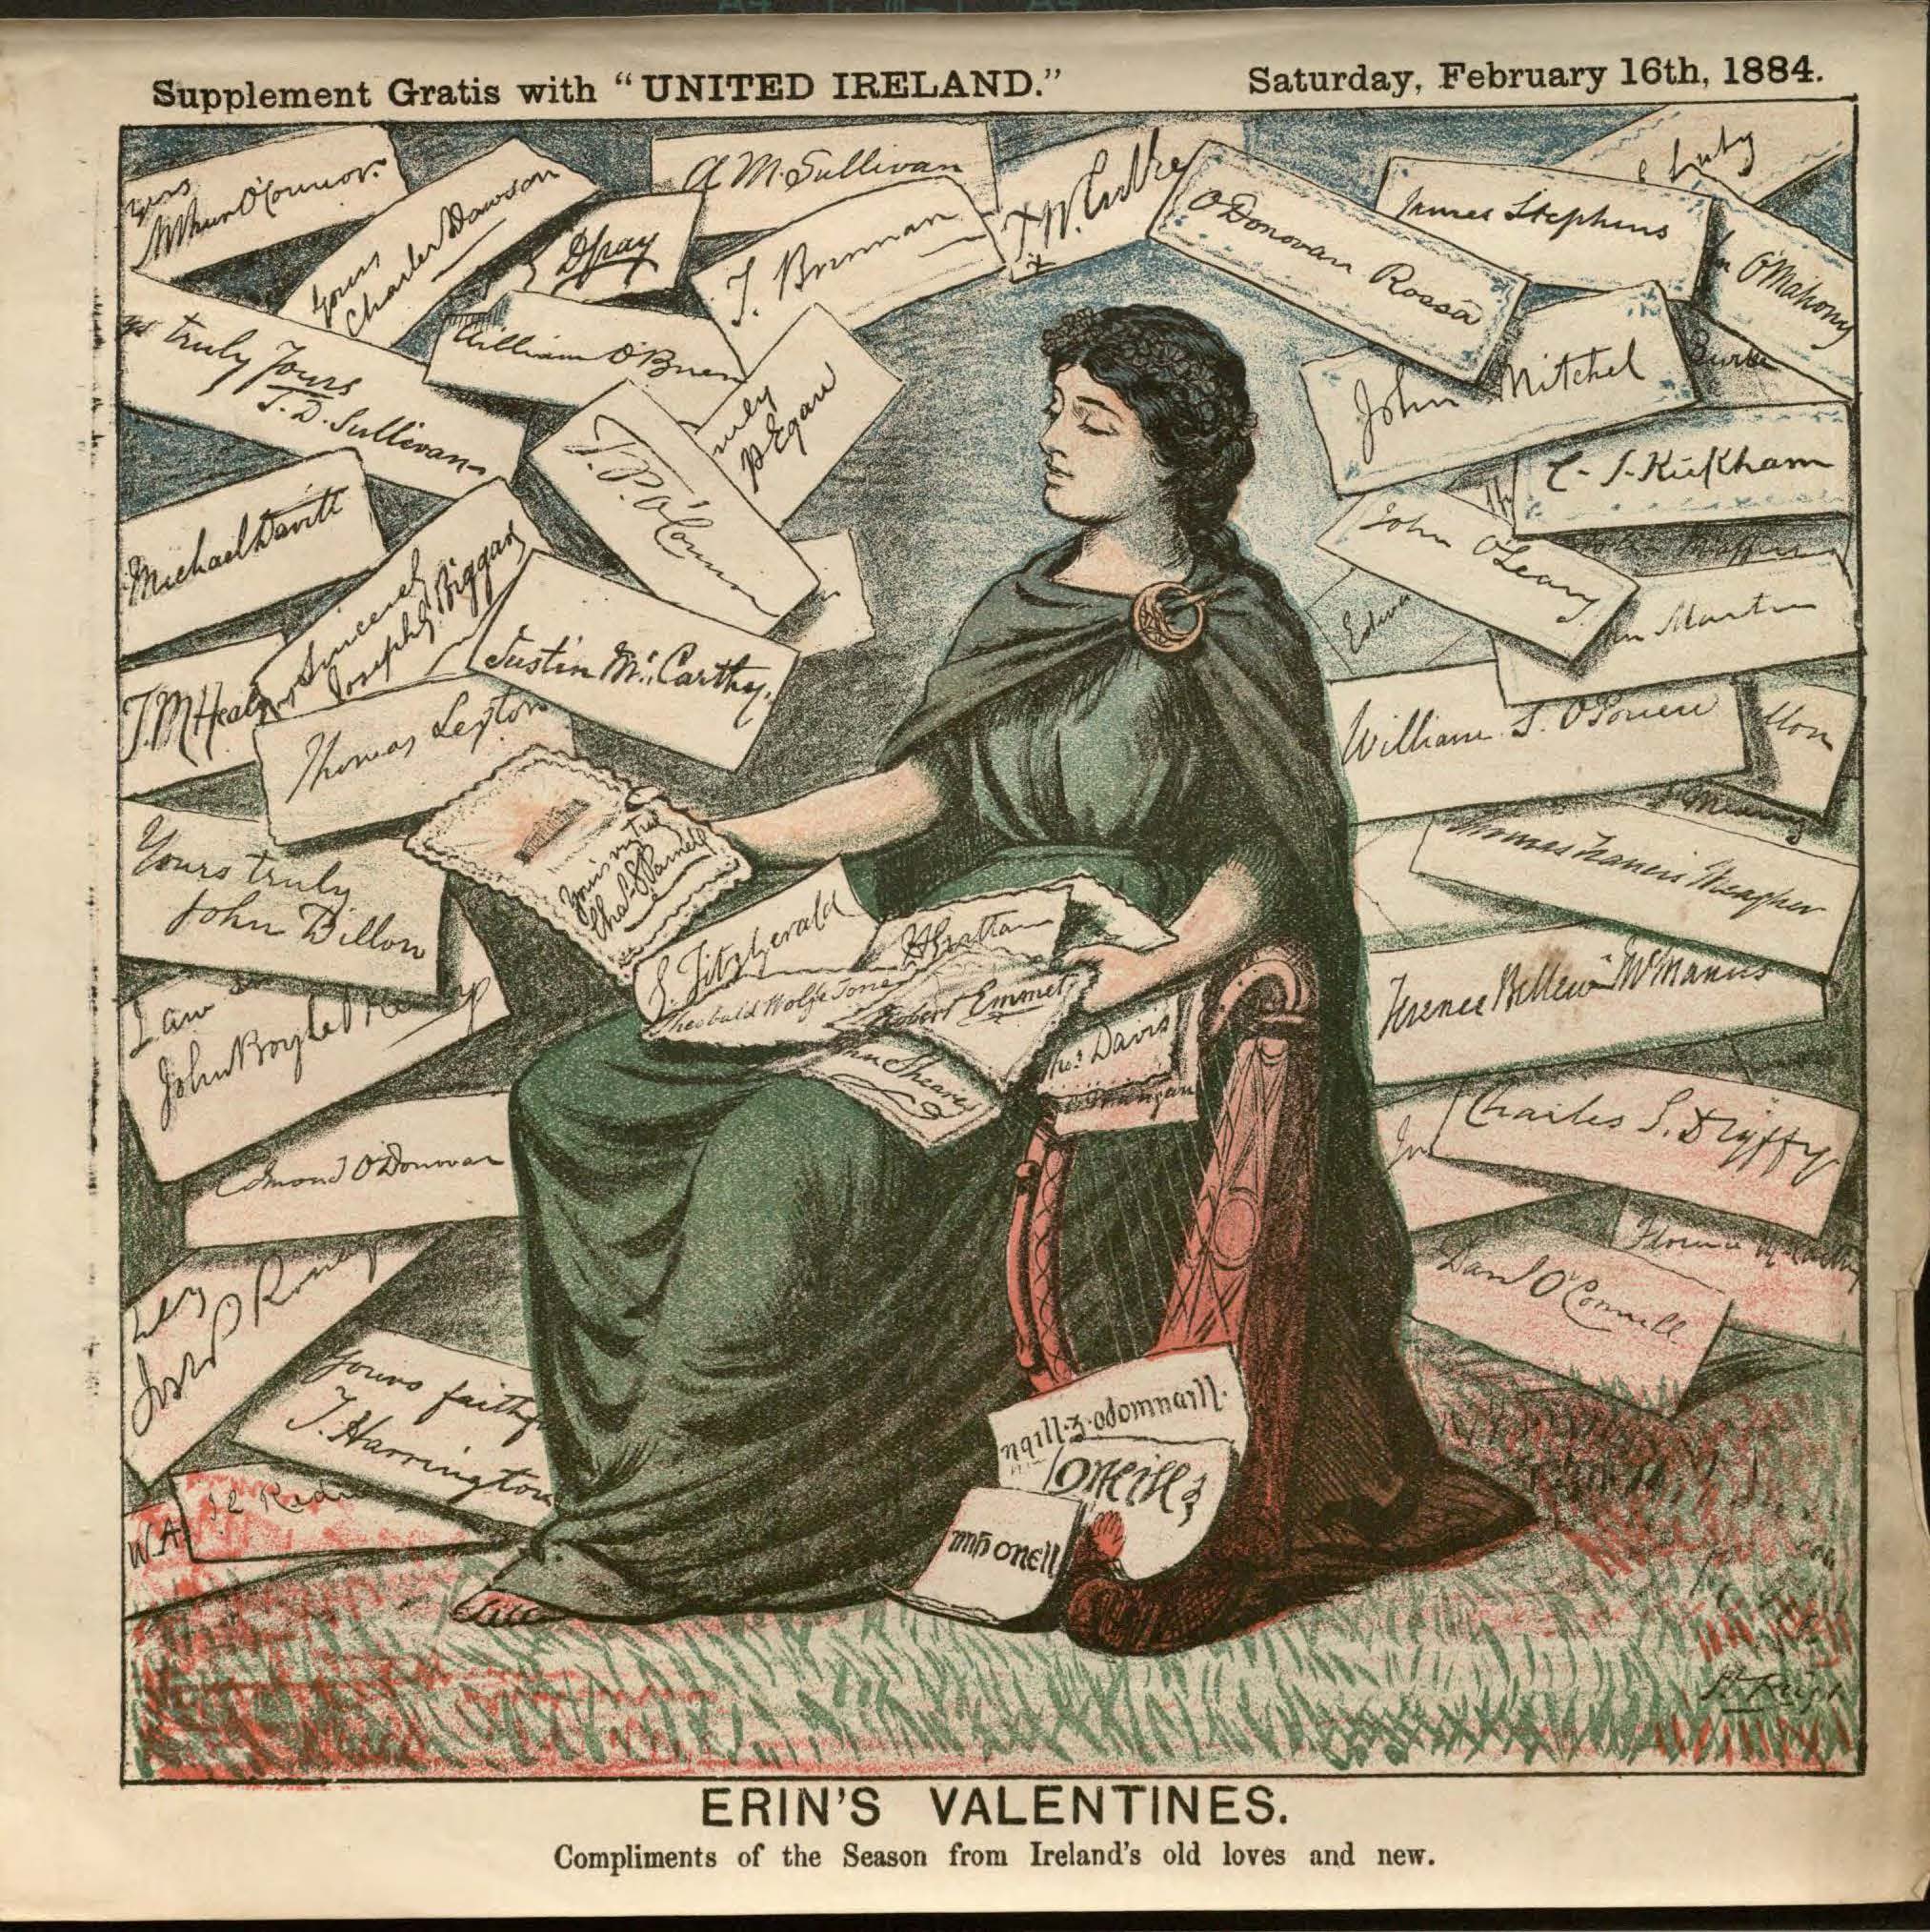 Image of Color Supplement from United Ireland, Cartoon featuring valentines to Erin (Ireland), February 16, 1884.